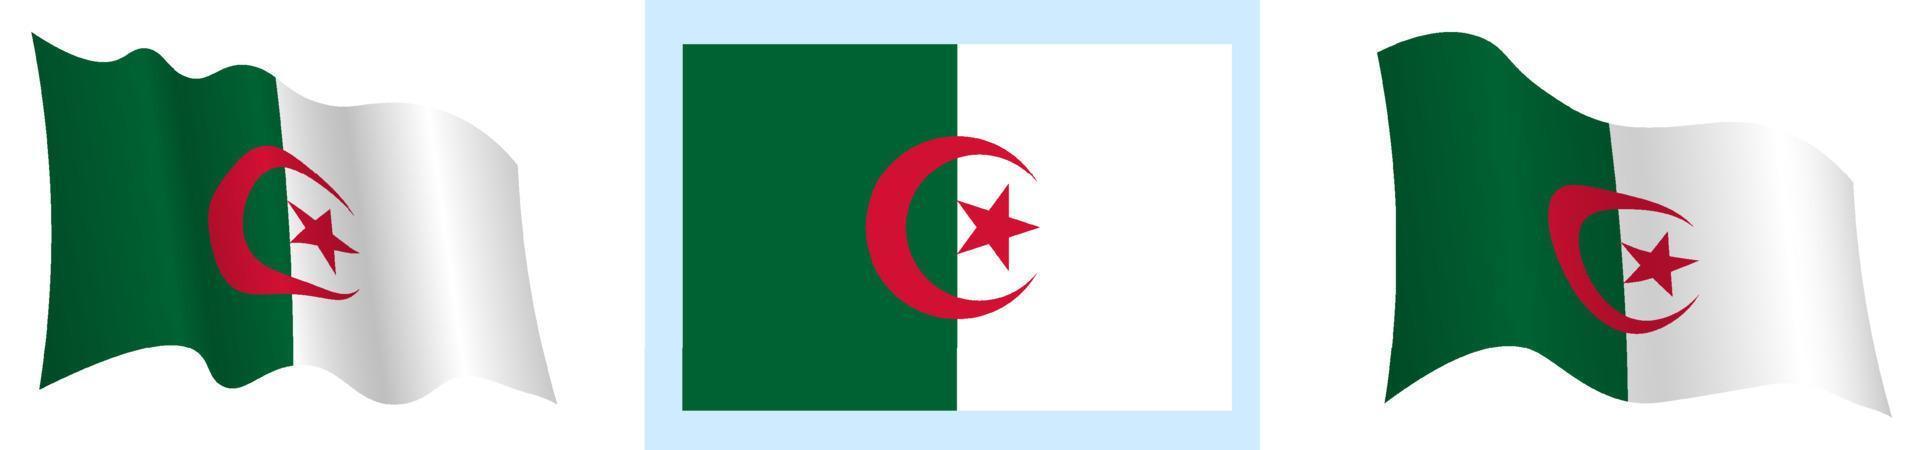 flag of algeria in static position and in motion, fluttering in wind in exact colors and sizes, on white background vector